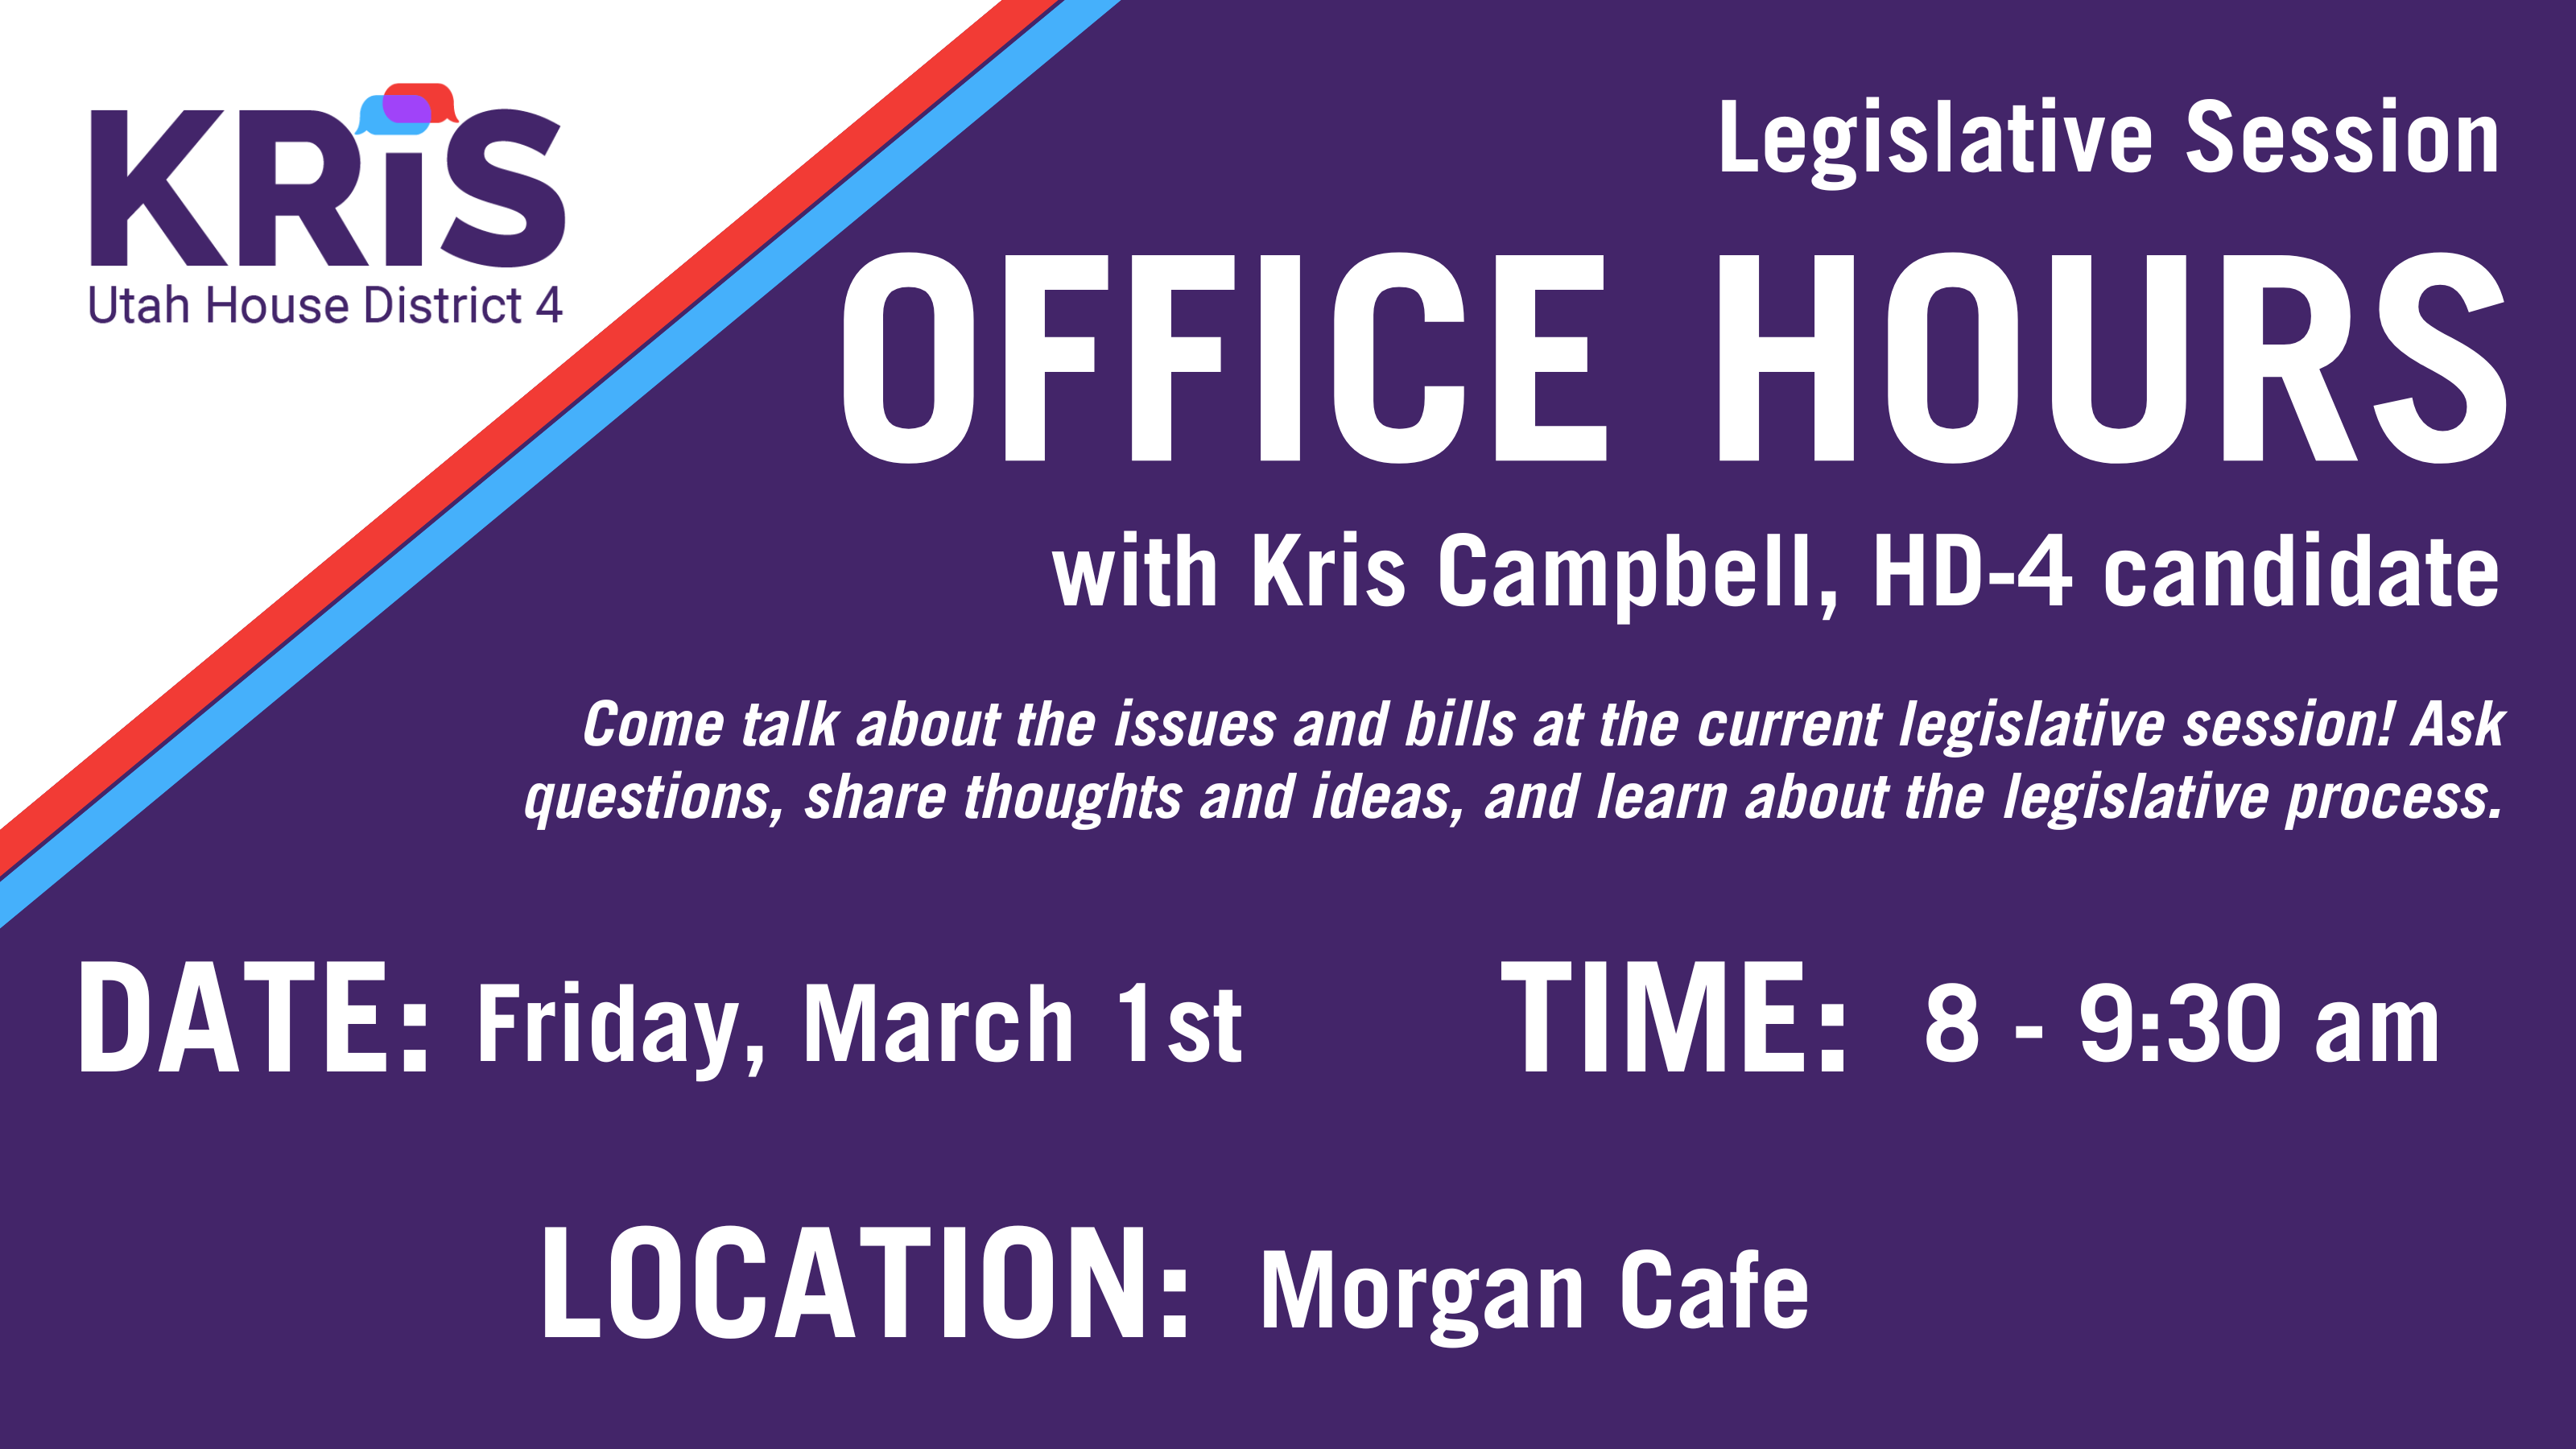 Legislative Session Office Hours with Kris Campbell, HD 4 Candidate. Friday, March 1st from 8-9:30 am at the cafe in the 7-Eleven in Morgan